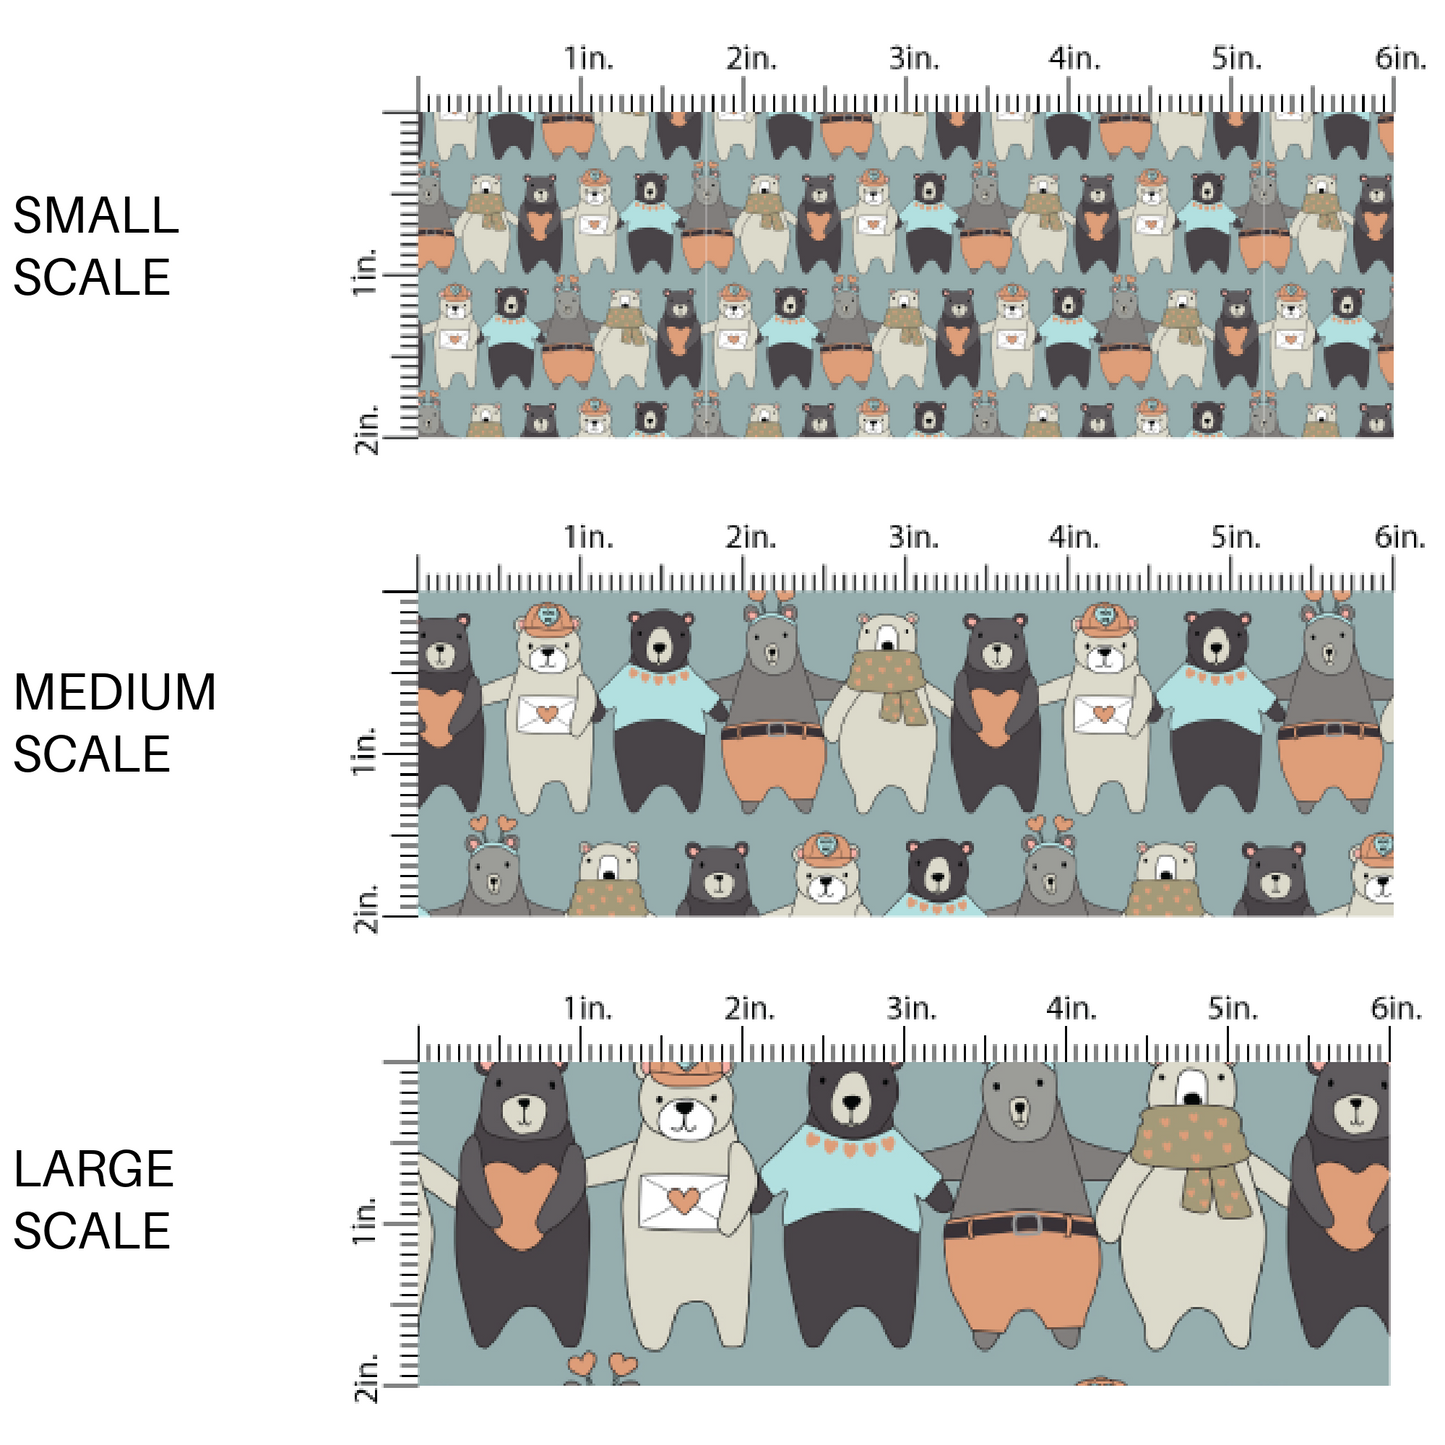 Blue fabric by the yard scaled image guide with black, gray, and beige cartoon bears